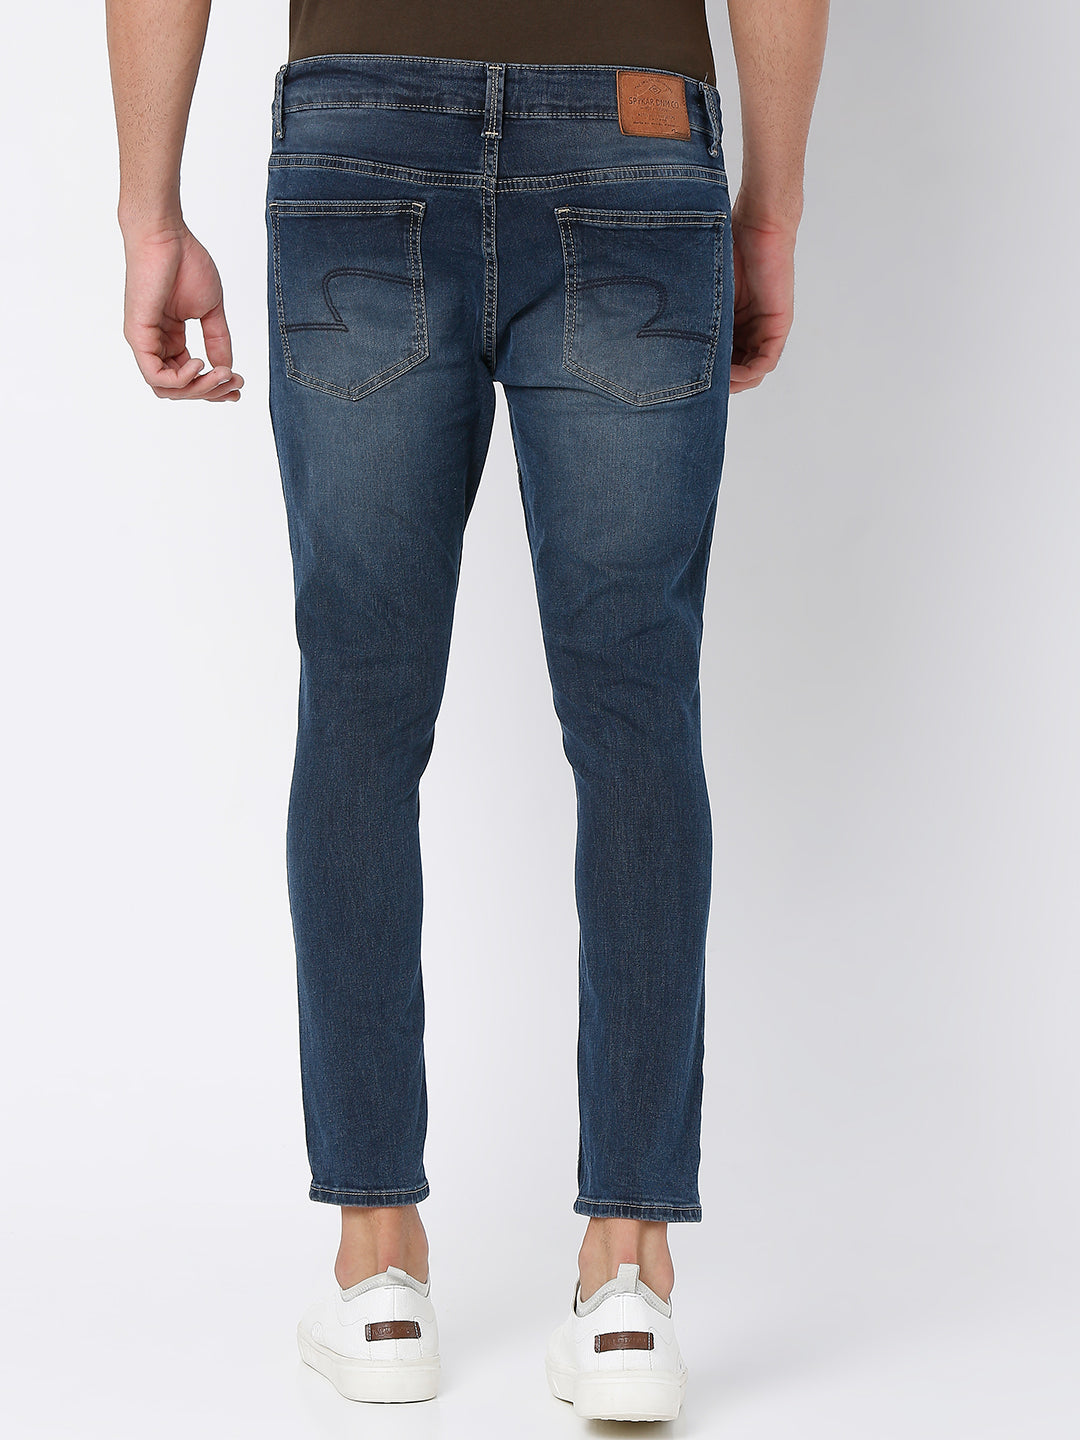 Spykar Mid Blue Cotton Slim Fit Tapered Length Jeans For Men (Kano)